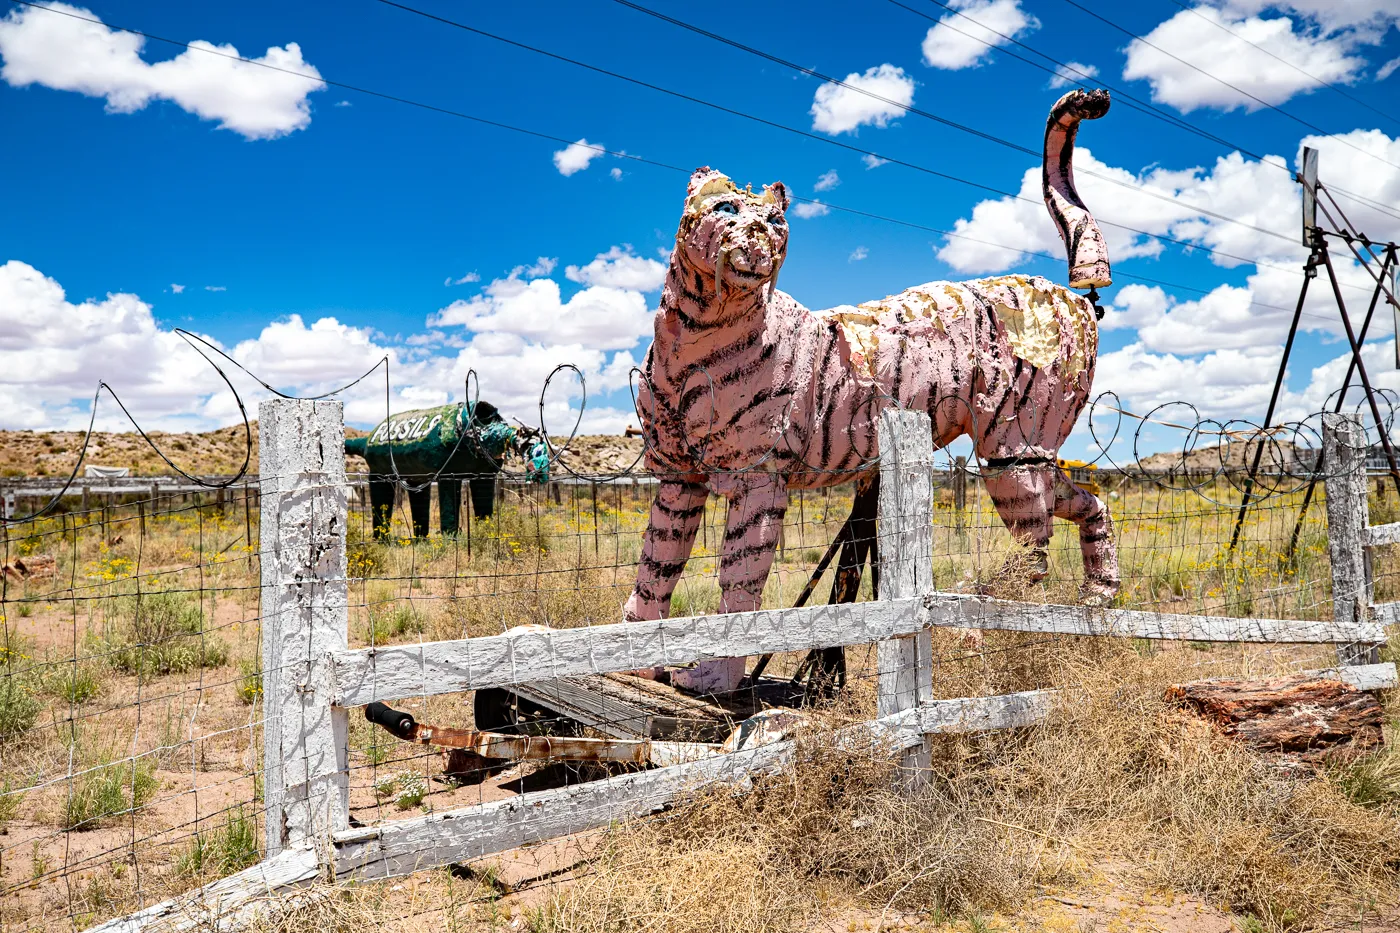 Giant tiger at Stewart's Petrified Wood in Holbrook, Arizona Route 66 Roadside Attraction